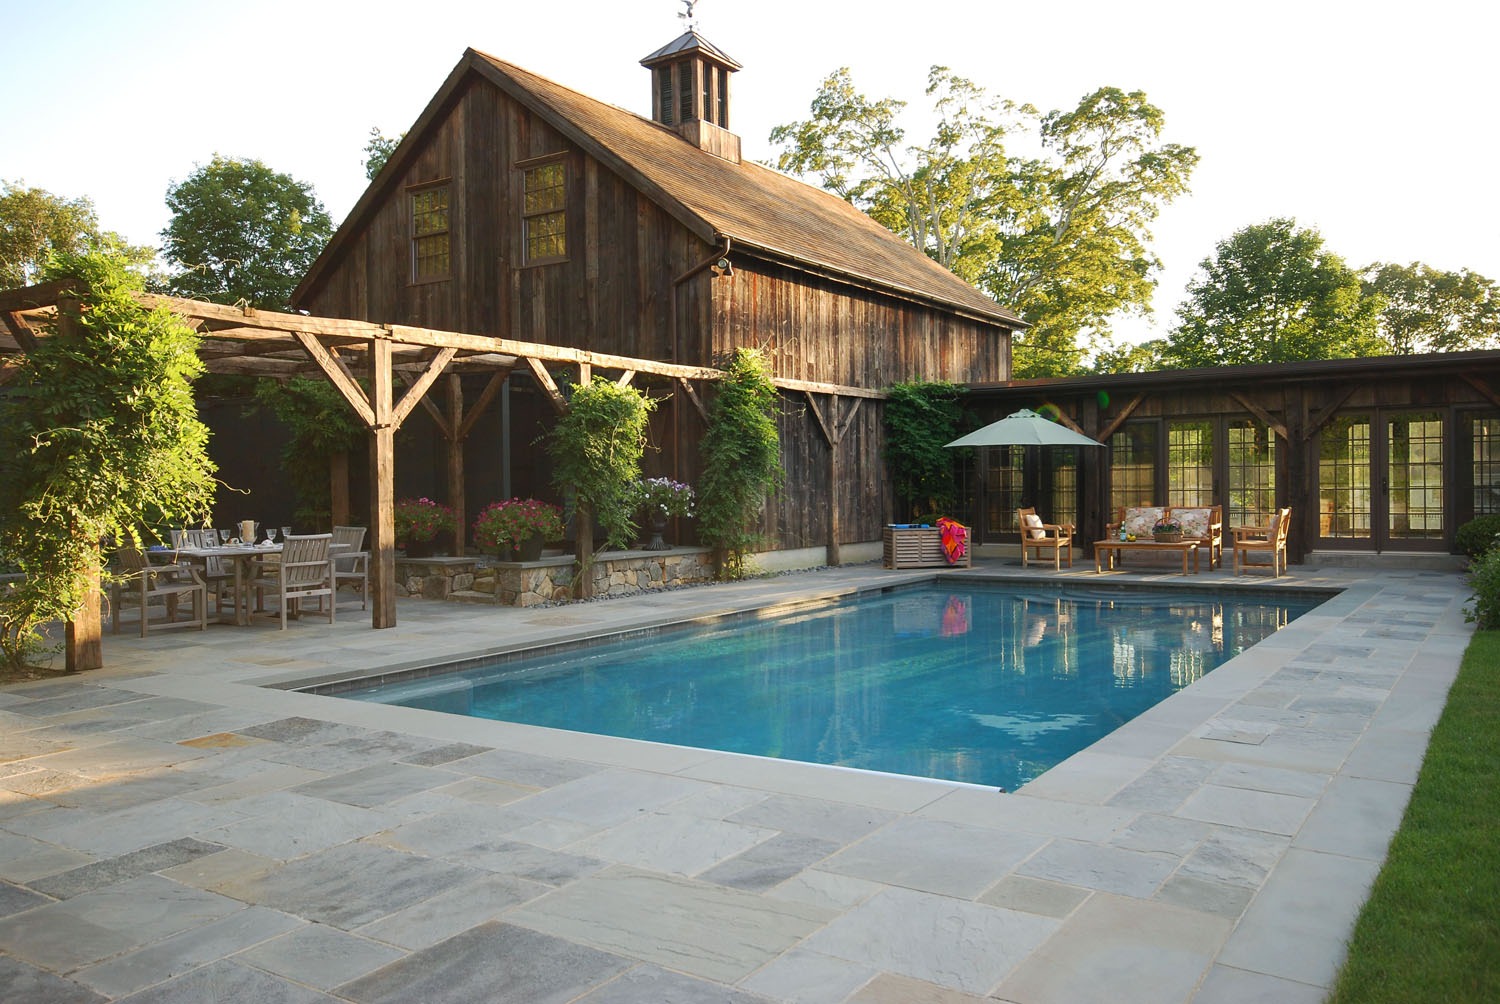 This image features a serene backyard with a swimming pool, rustic barn-style architecture, a pergola, outdoor furniture, and lush greenery on a sunny day.